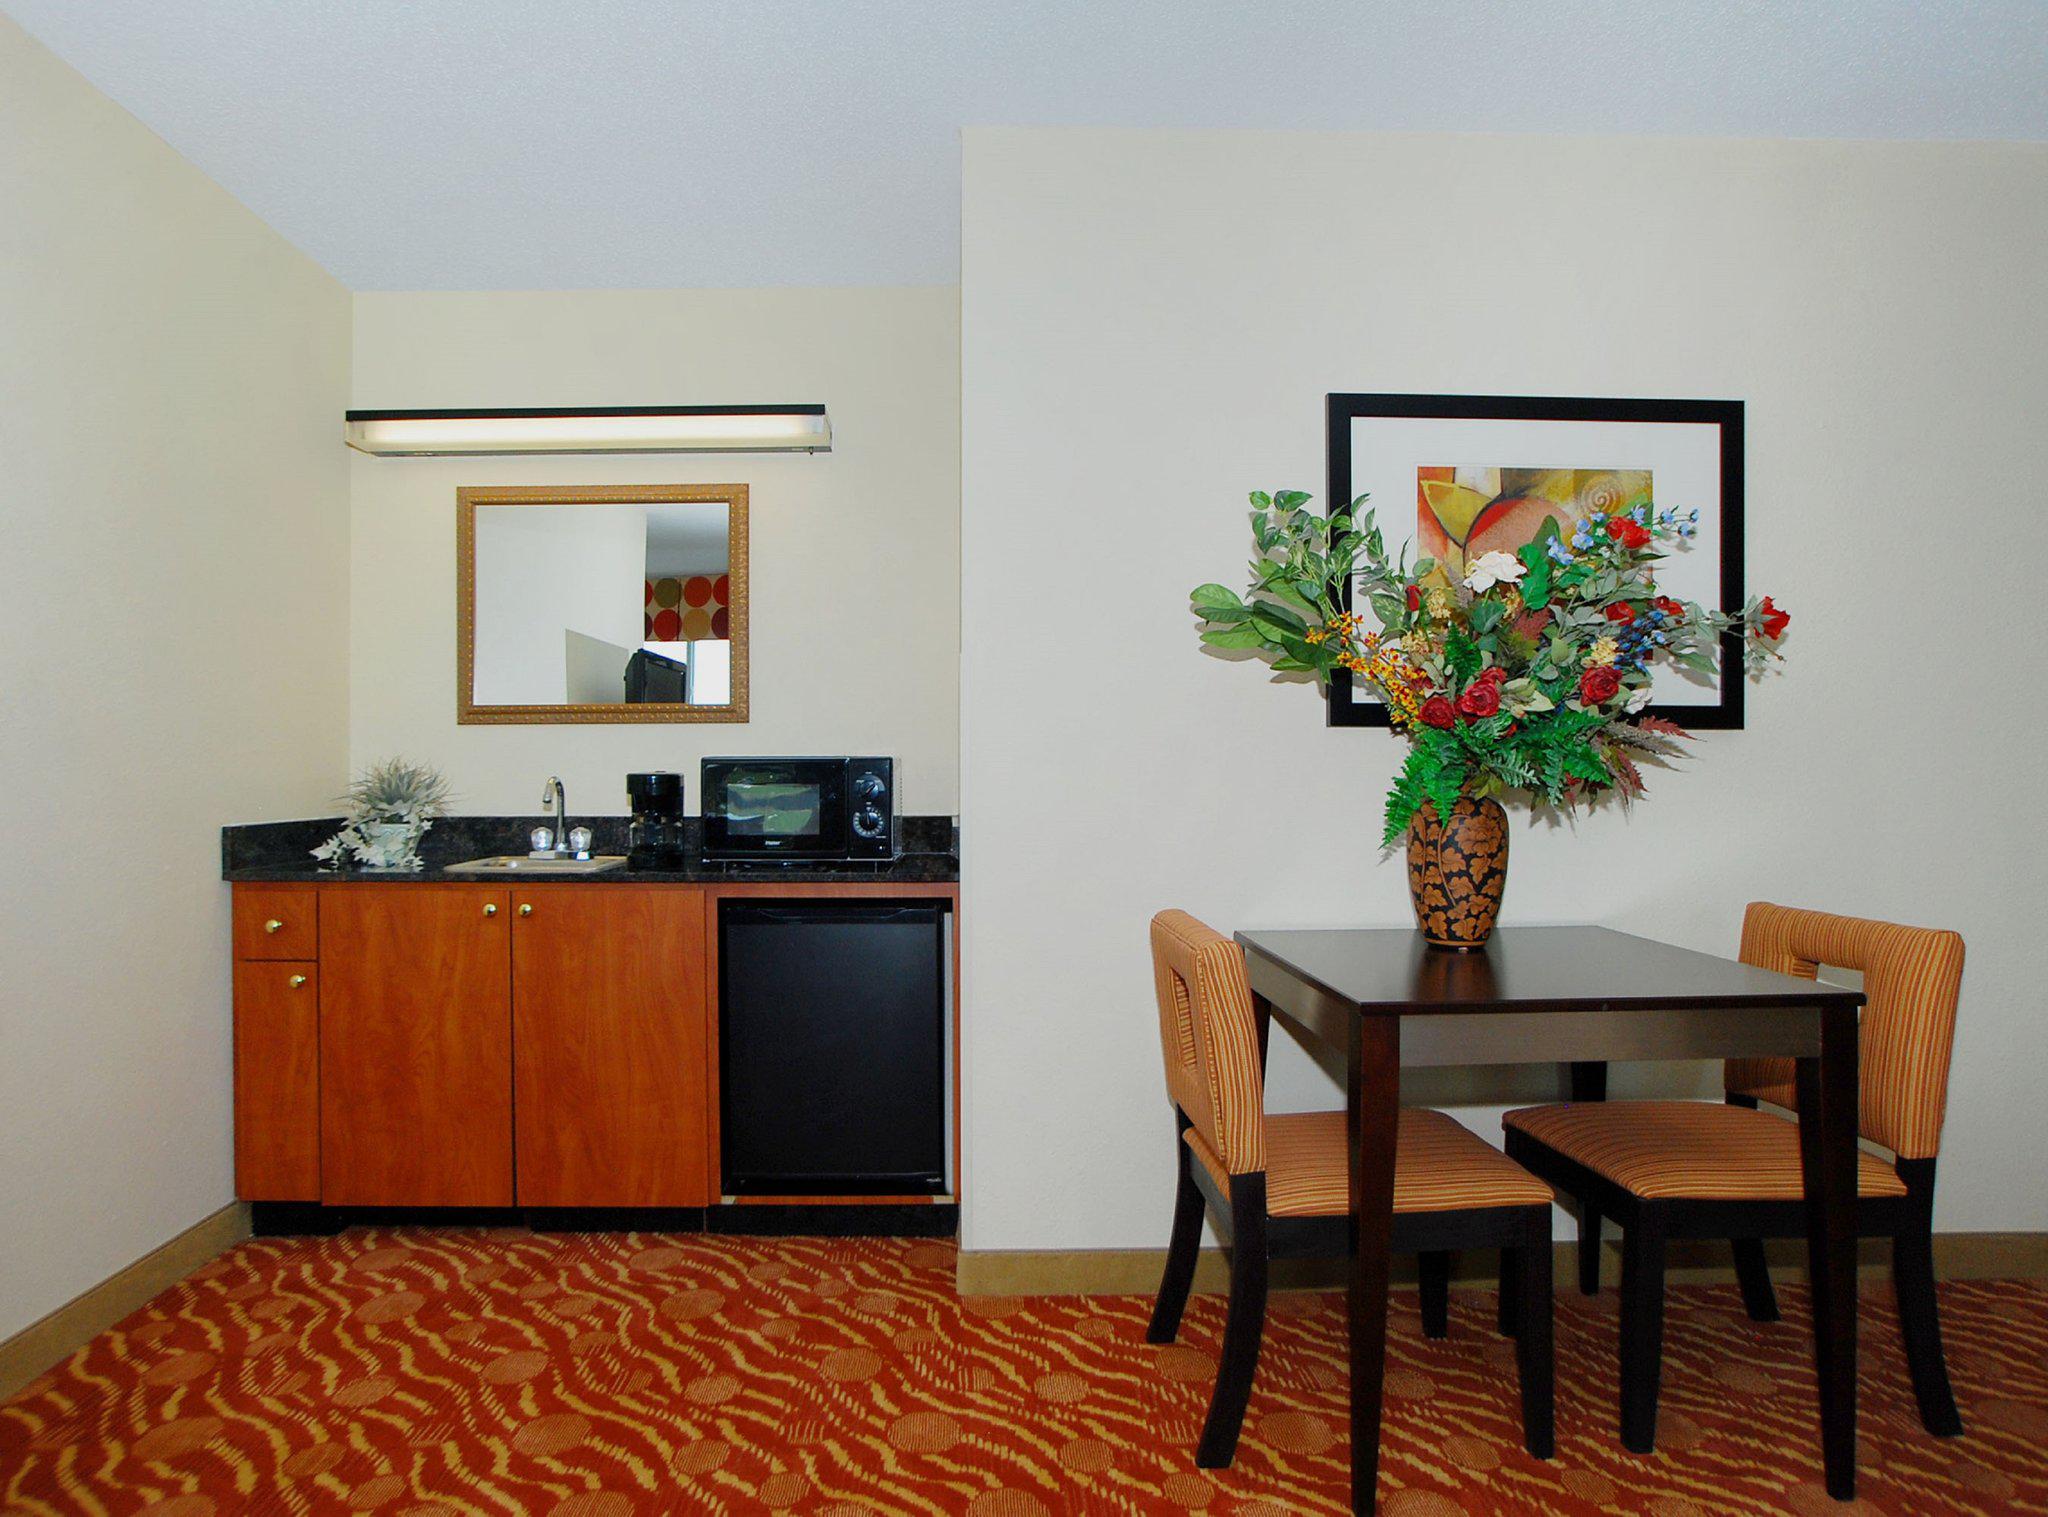 Holiday Inn Express & Suites Anderson-I-85 (Hwy 76, Ex 19B) Photo